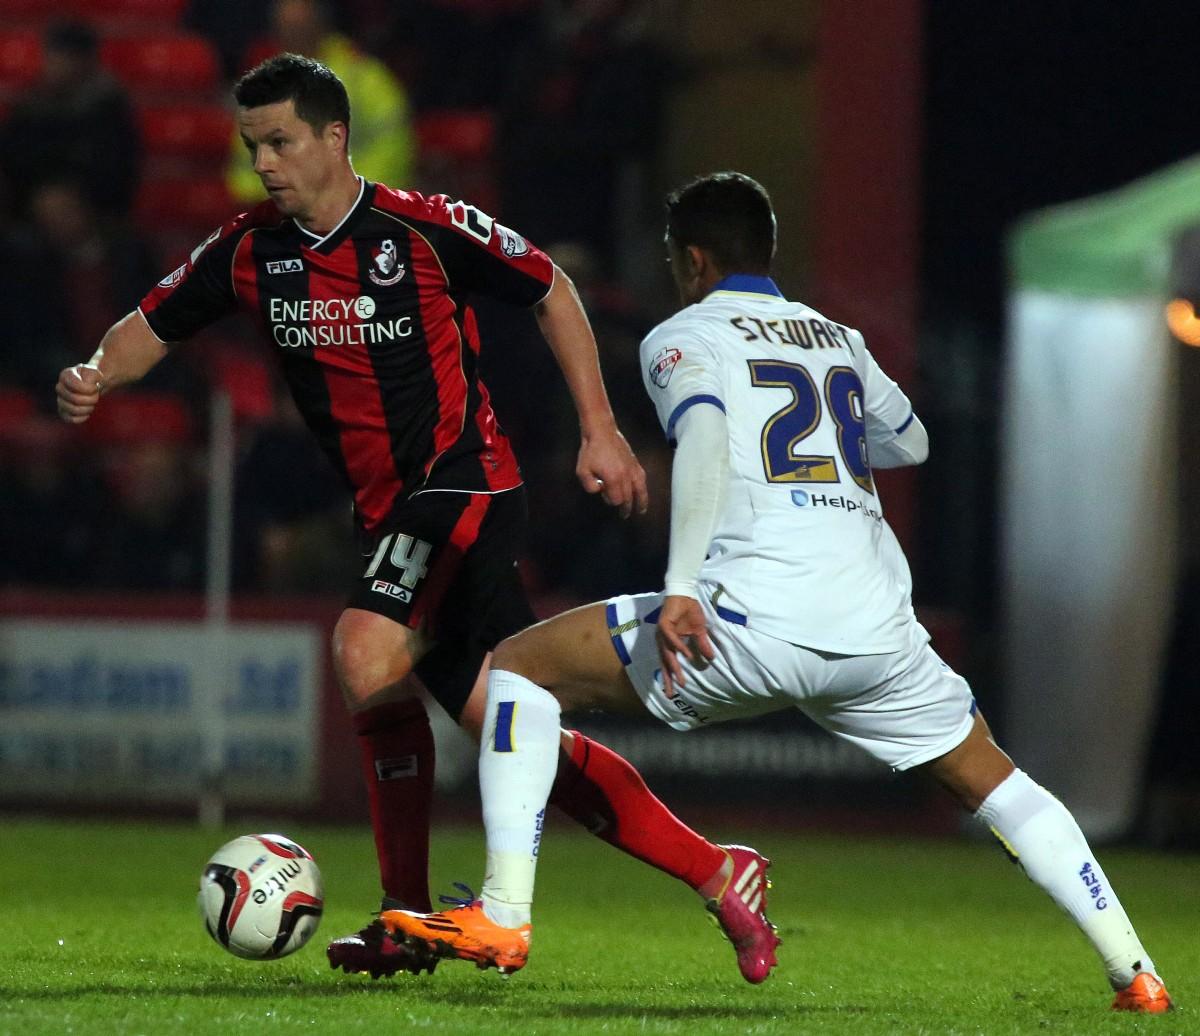 All our pictures from AFC Bournemouth v Leeds United an Dean Court on Tuesday, March 25, 2014.